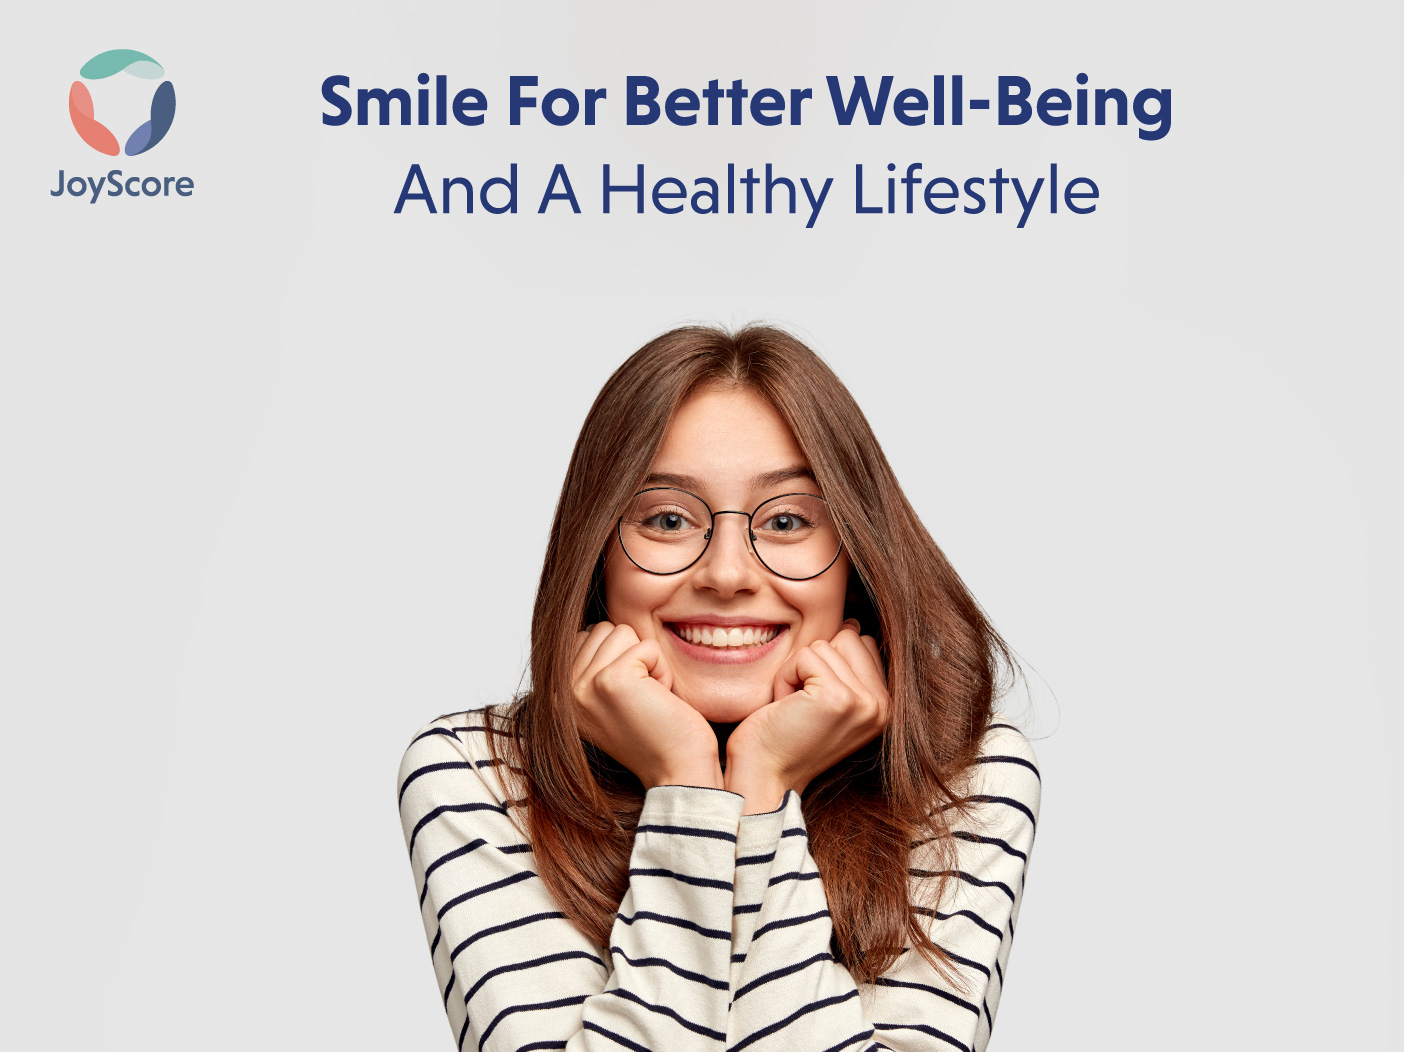 Smile For Better Well-Being And a Healthy Lifestyle